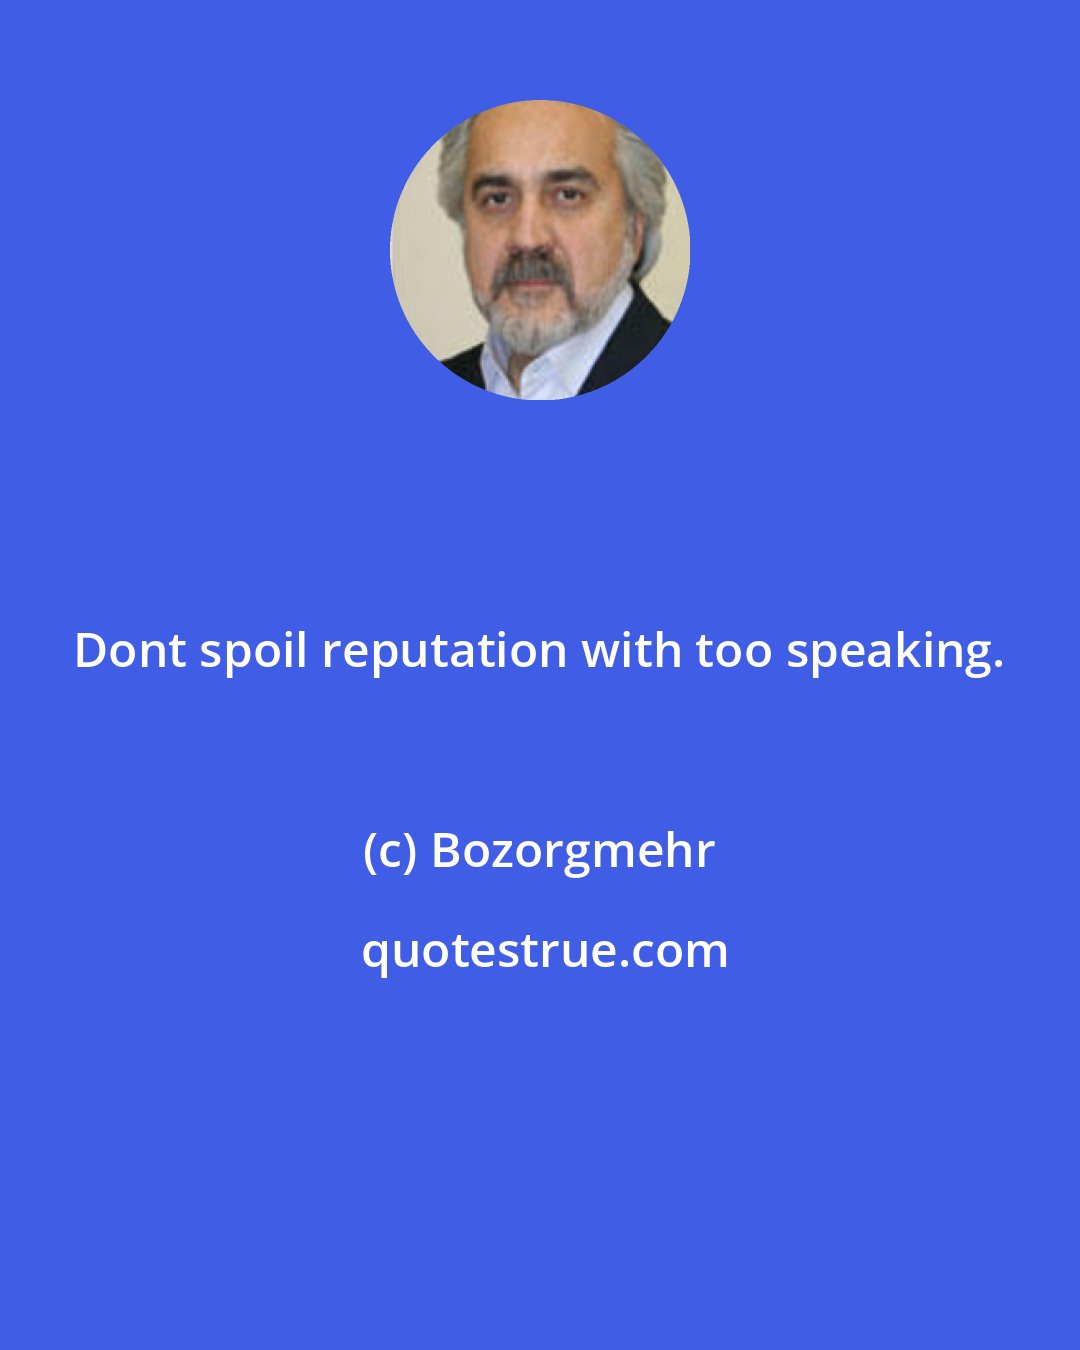 Bozorgmehr: Dont spoil reputation with too speaking.